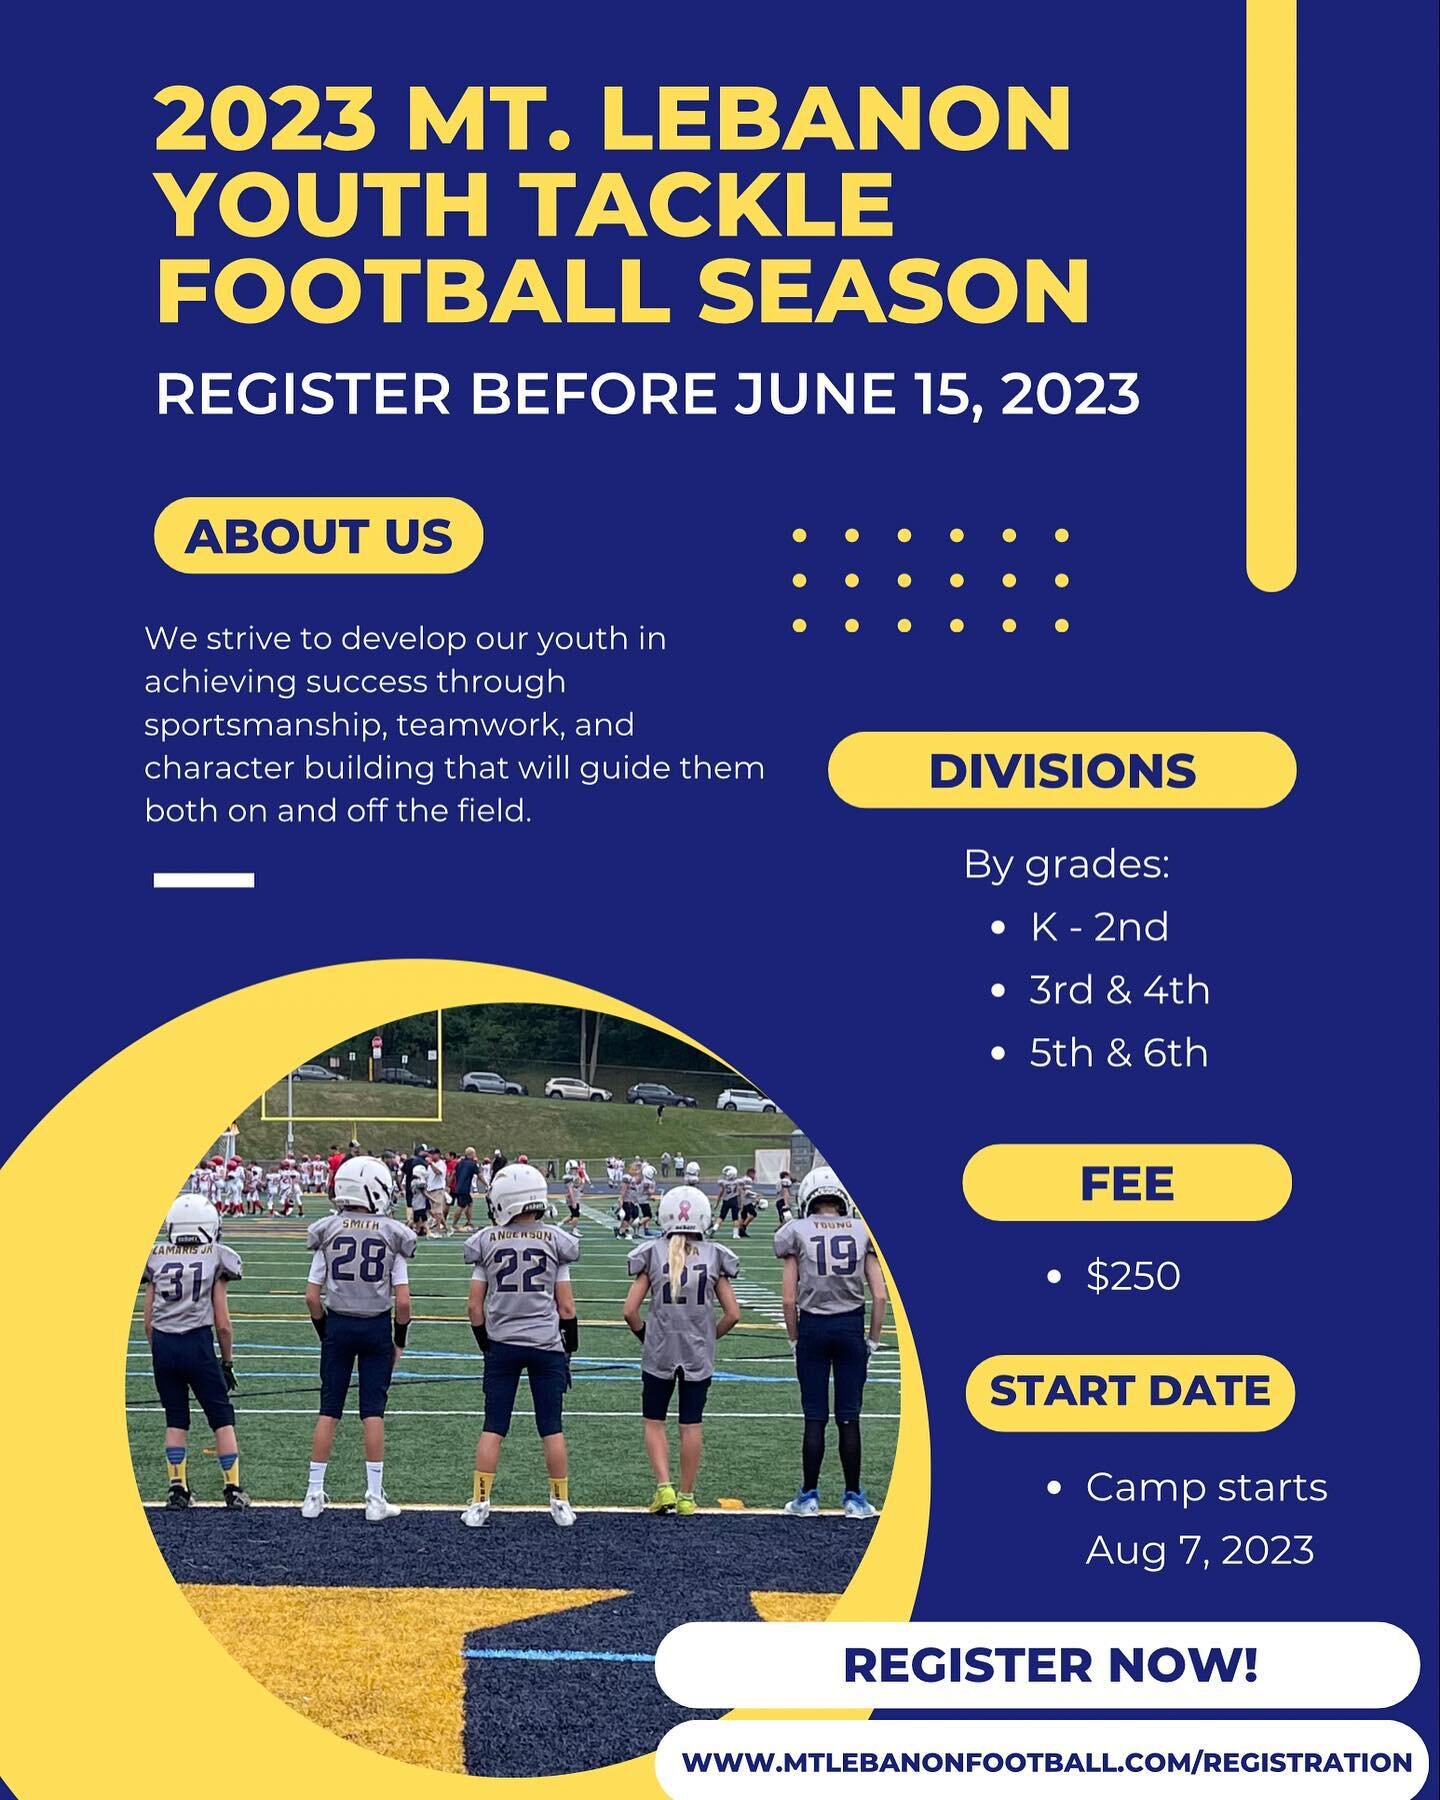 Have you signed up yet?

Sign your kid(s) up for this upcoming season today! The league is starting to gather up information from all the schools participating to see how many kids are in the program and we want to ensure all the kids that want to pl